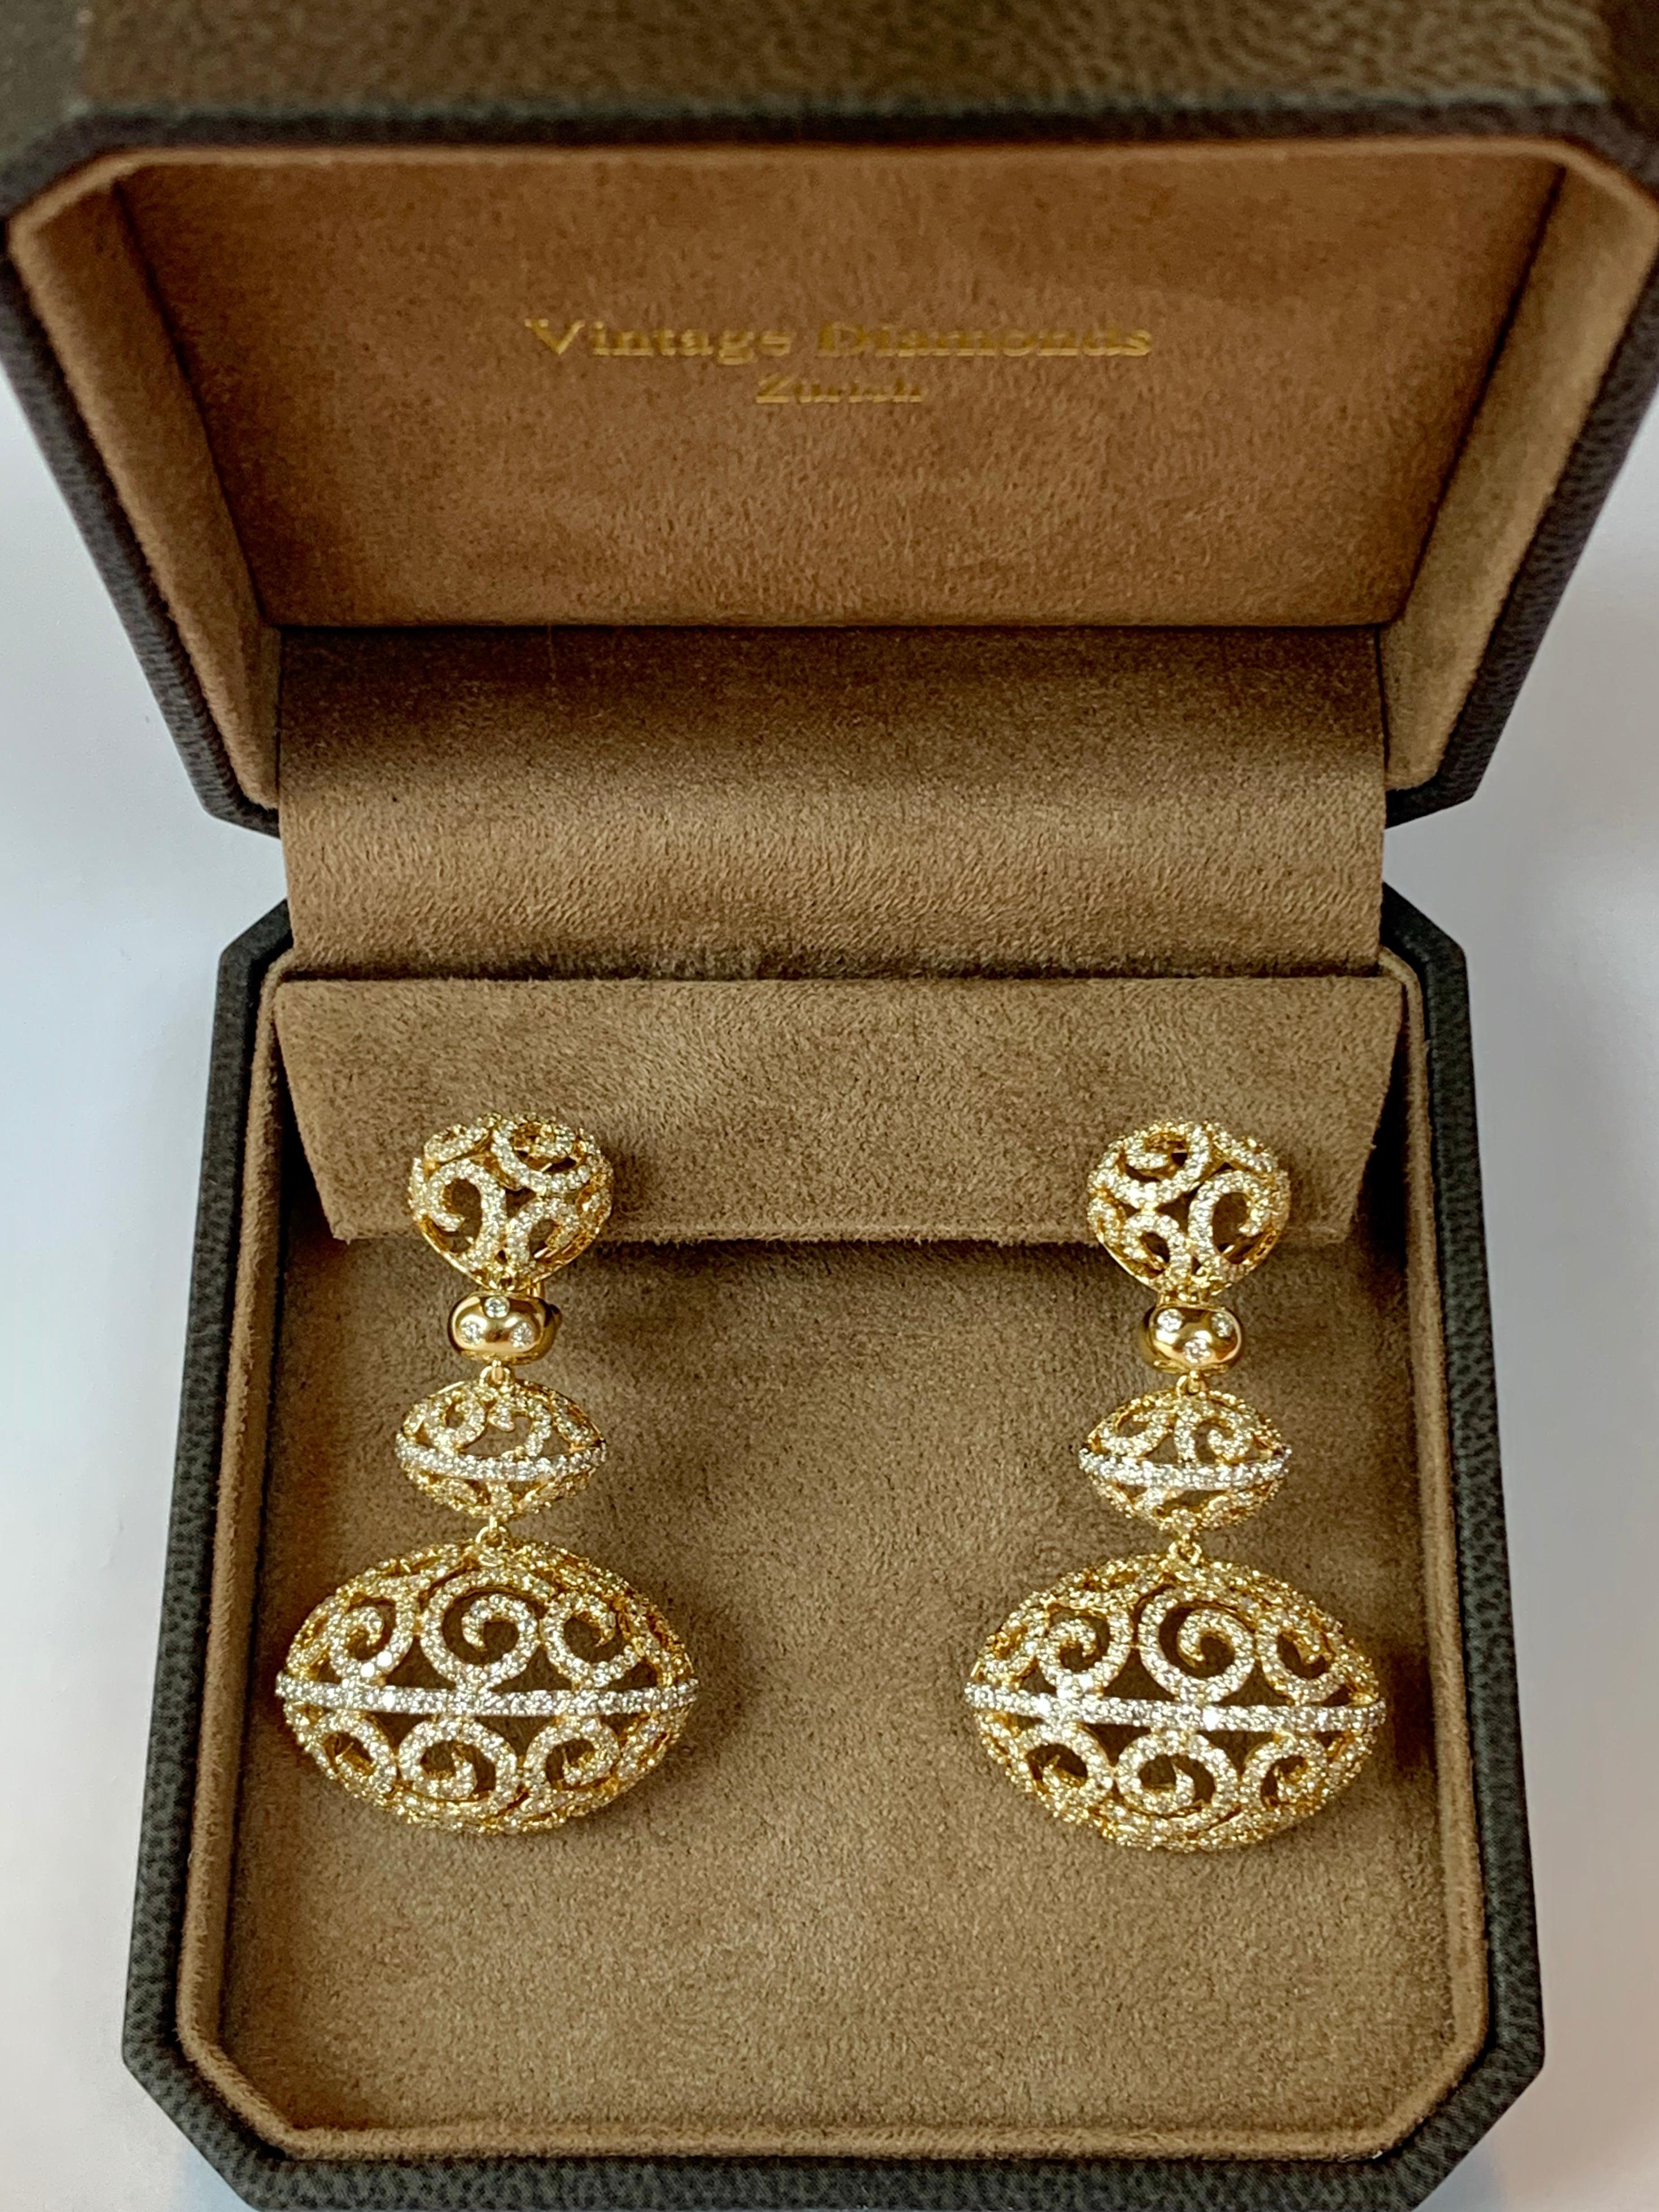 A real pair of statement earring in 18 K Gold that makes heads turn! Intricate workmanship distinguishes these fabulous earrings.  Set with 722  brilliant cut Diamonds weighing 5.27 ct, G color, vs clarity. Matching necklace available!
Masterfully